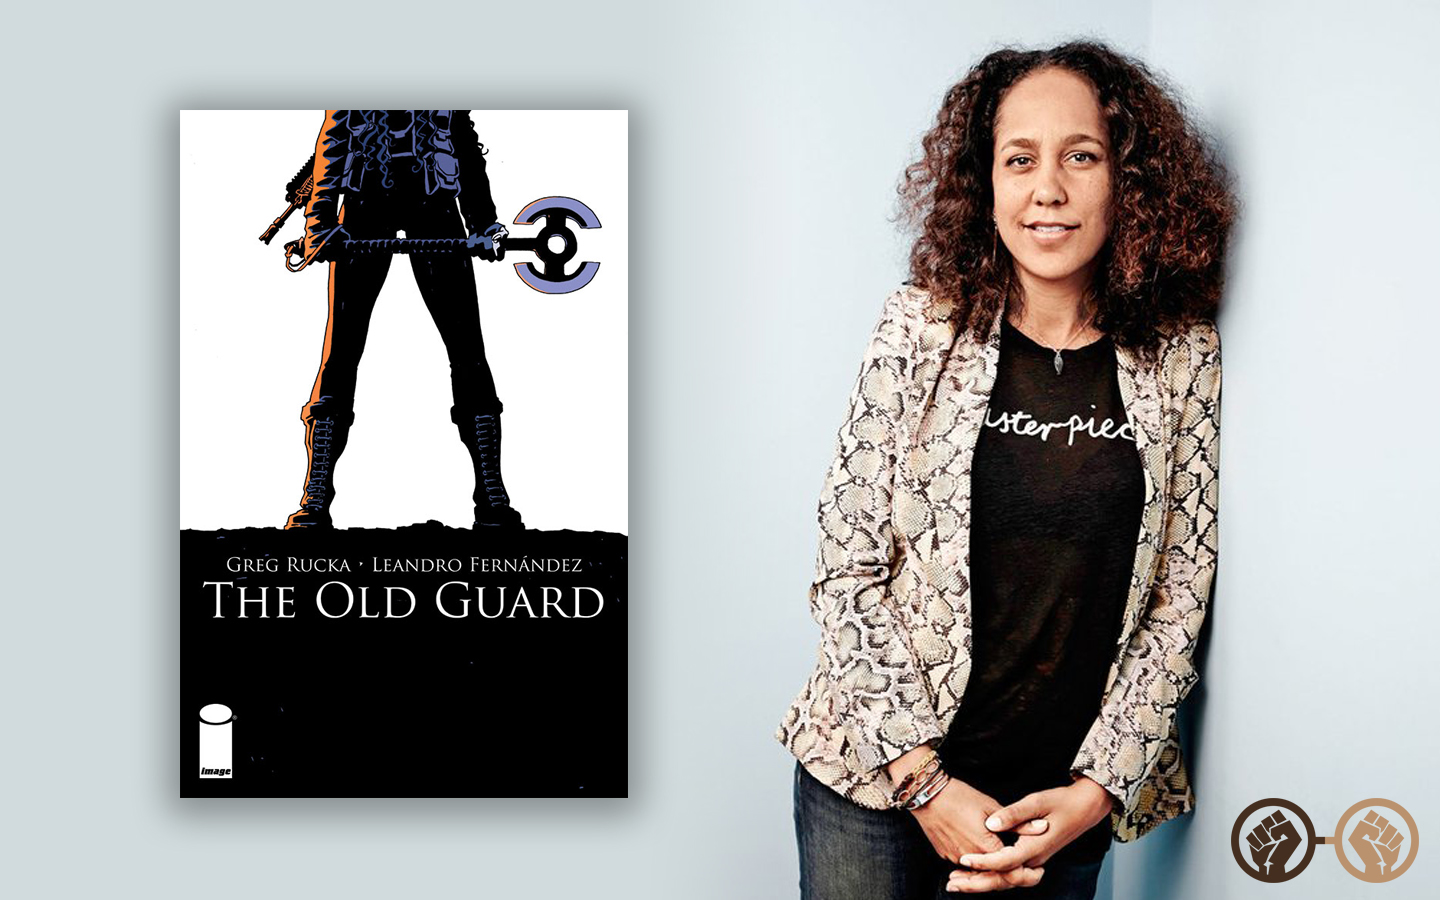 ‘The Old Guard’ Finds Director in Gina Prince-Bythewood